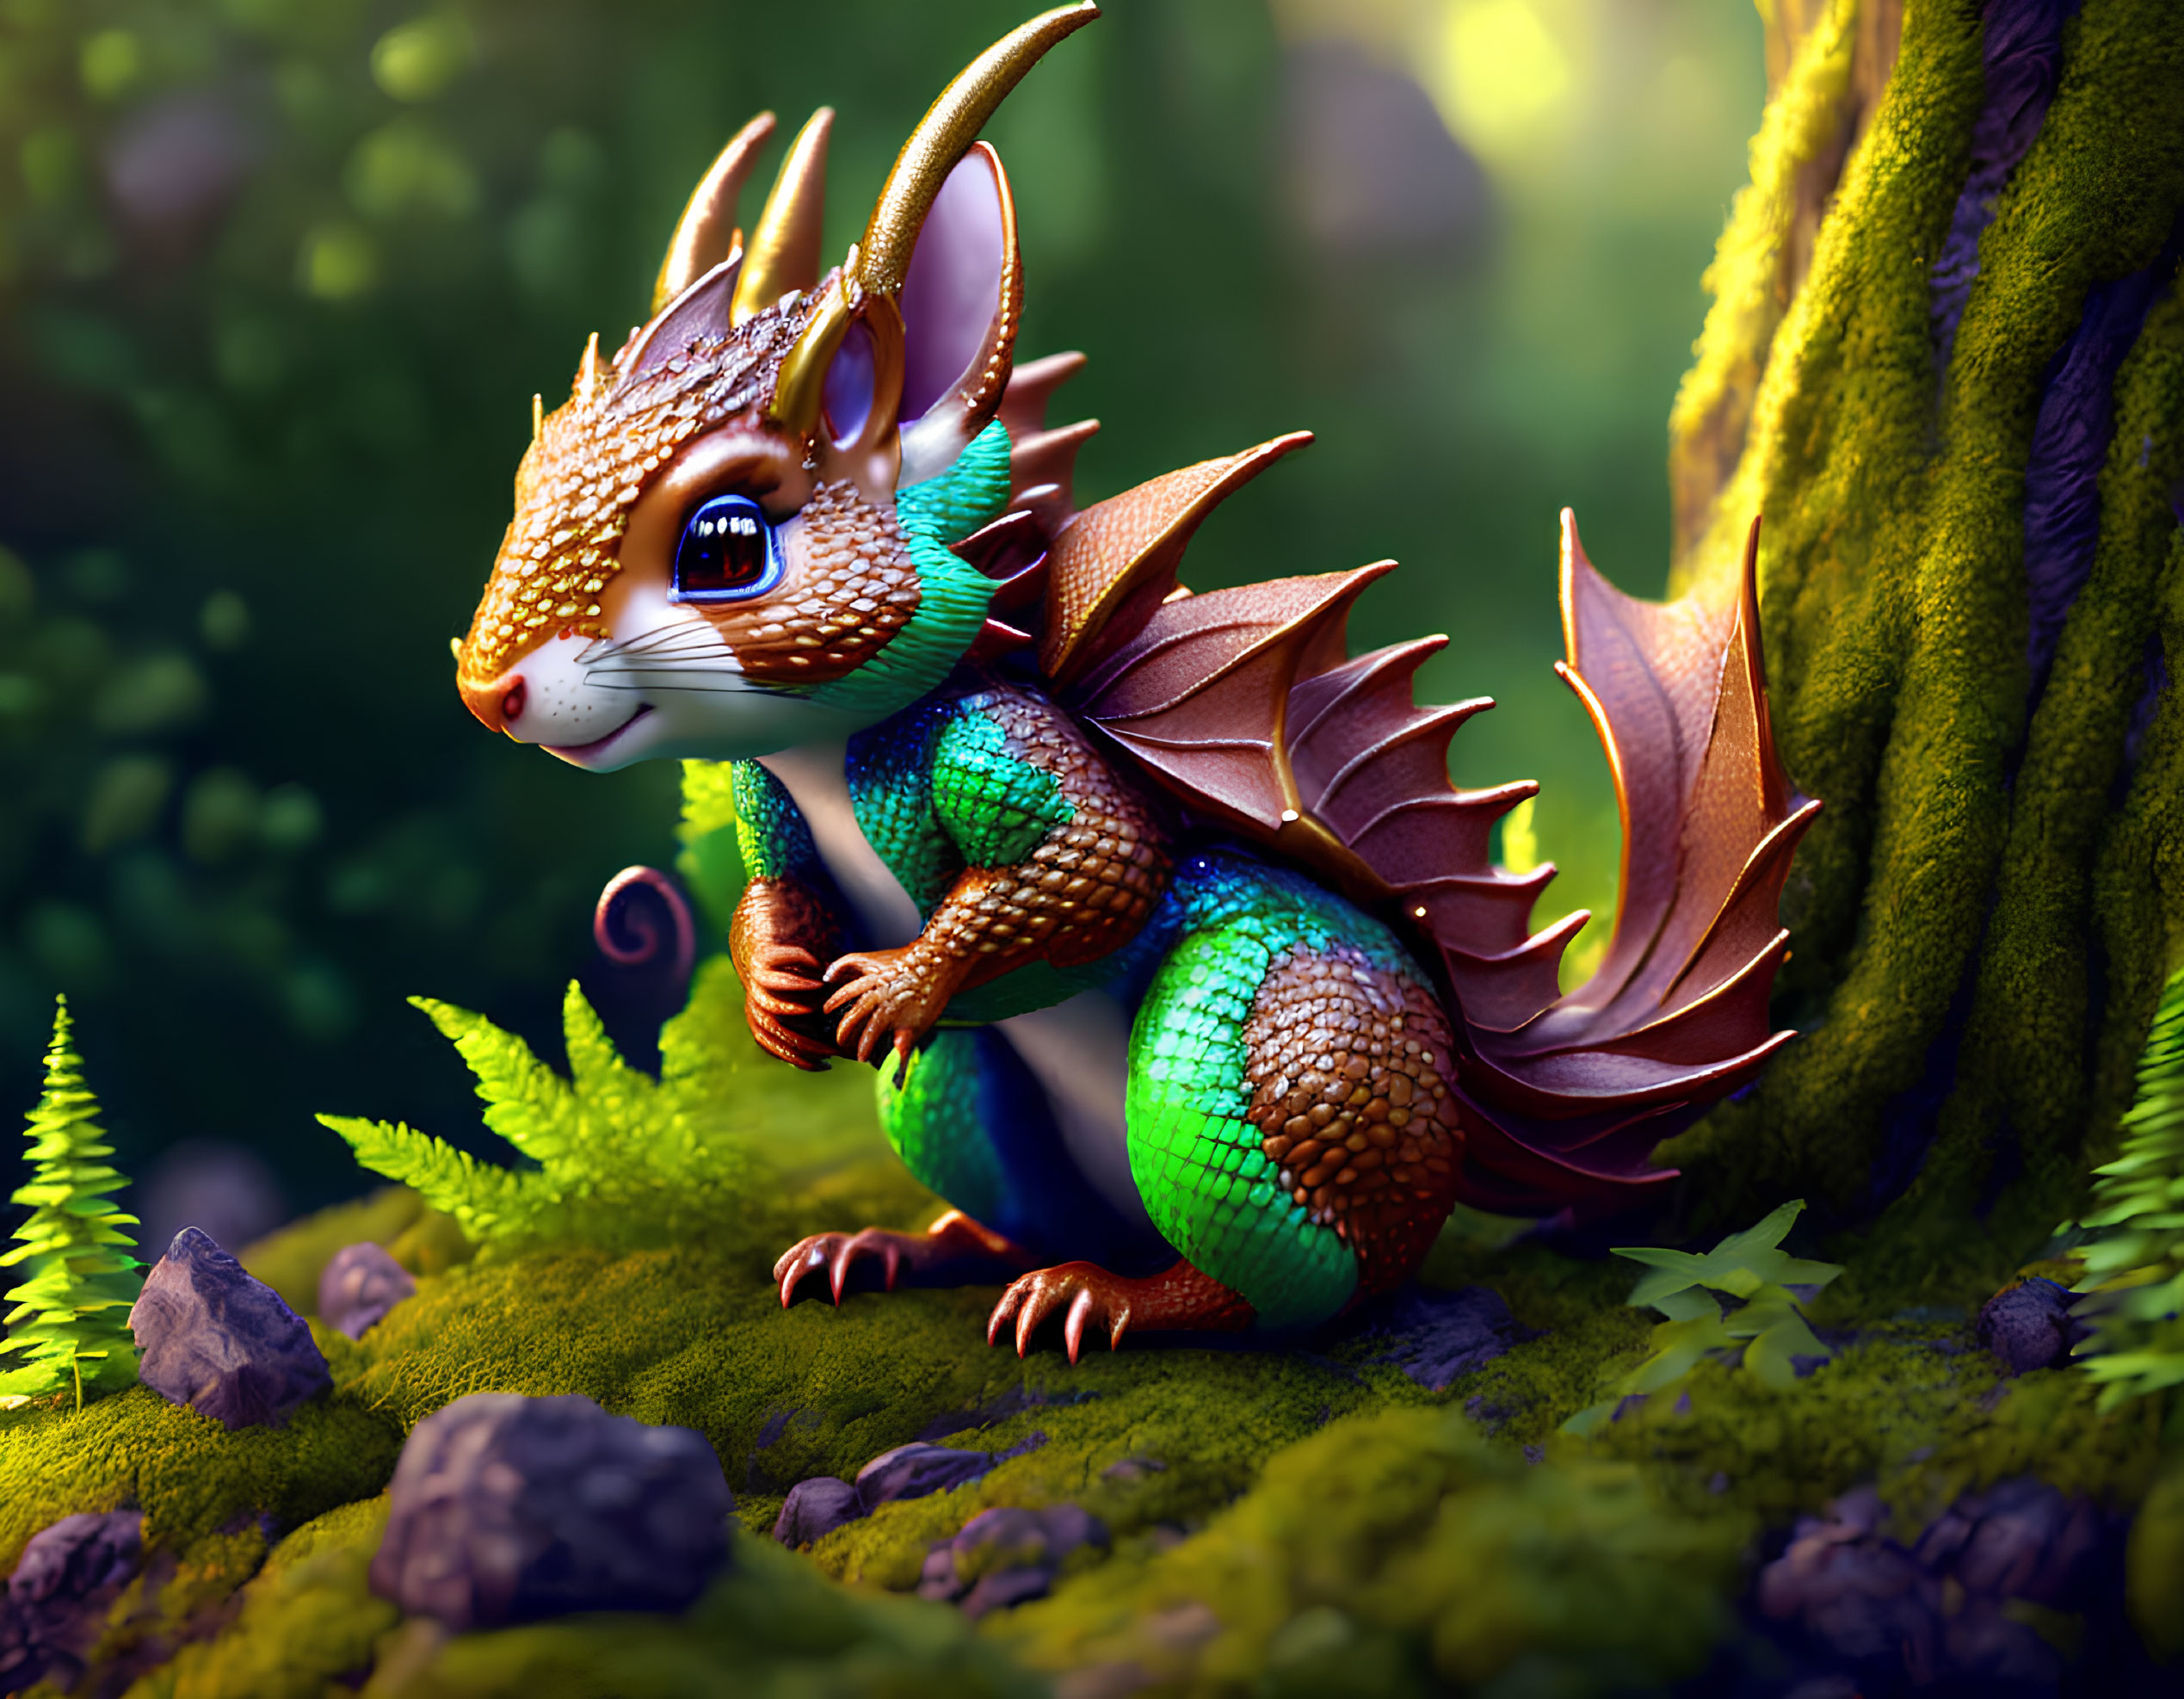 Illustration of dragon-squirrel hybrid in enchanted forest